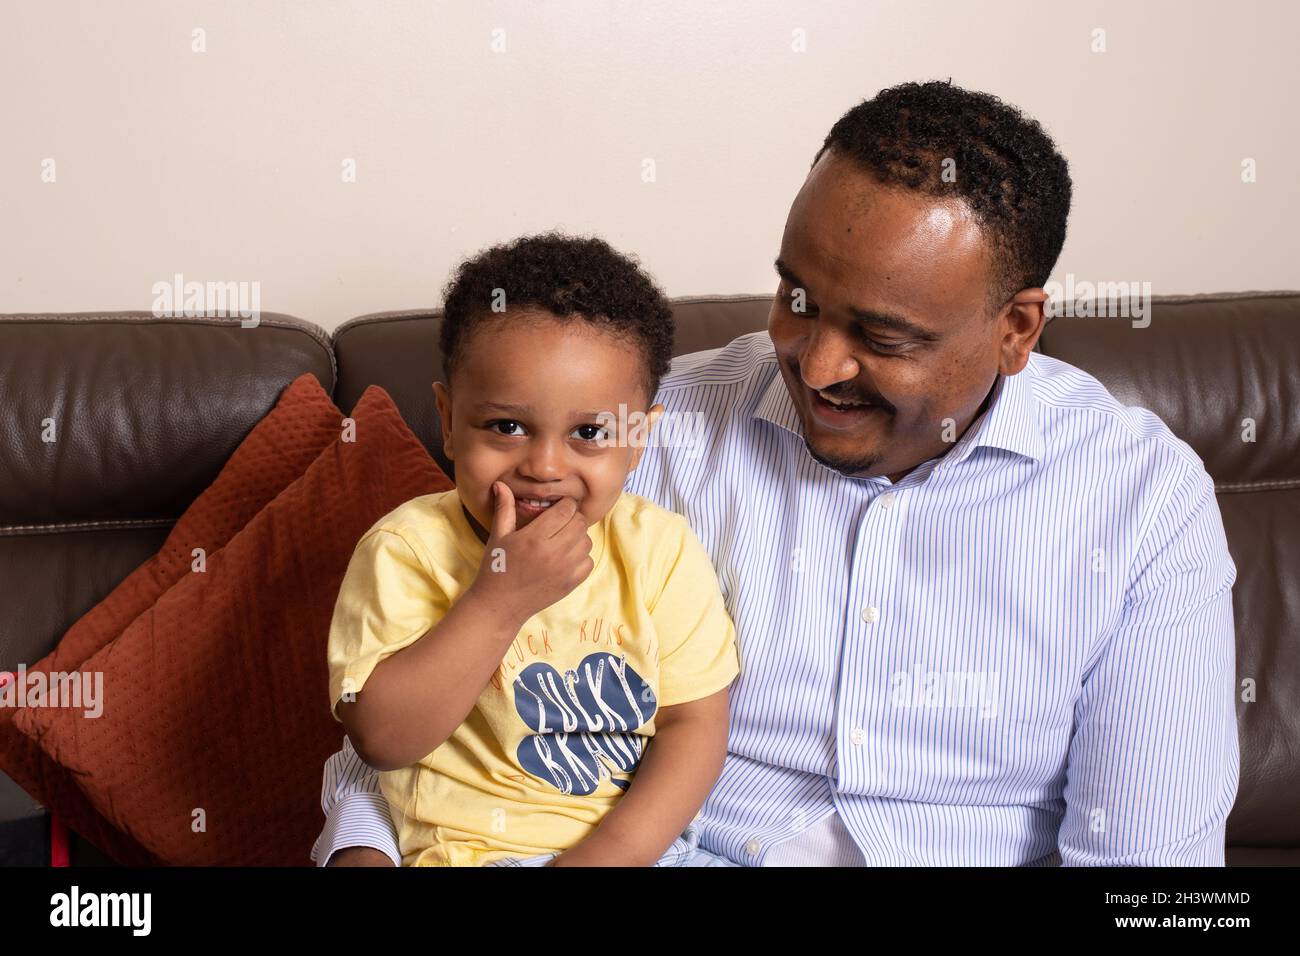 Laughing portrait of 2 year old toddler boy with his father, sitting on couch at home Stock Photo